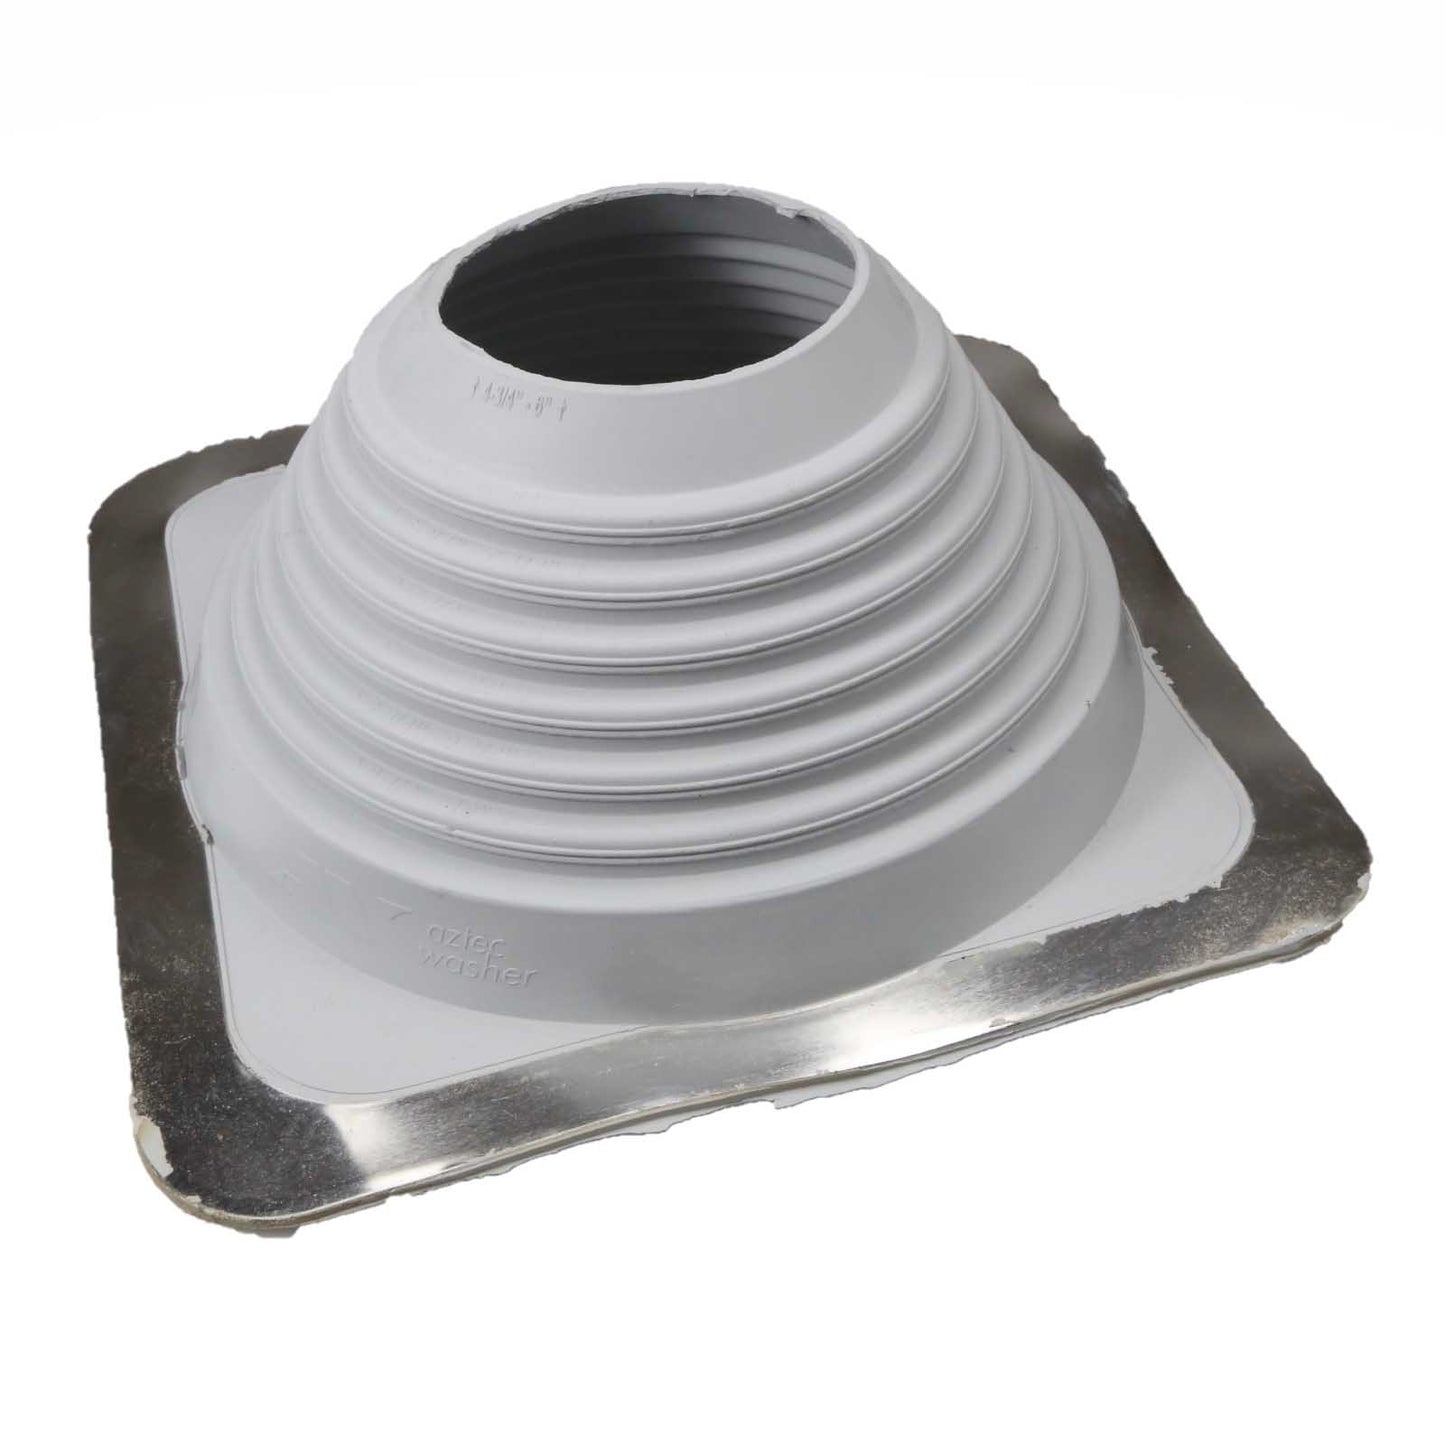 #6 Roofjack Square EPDM Pipe Flashing Boot Gray